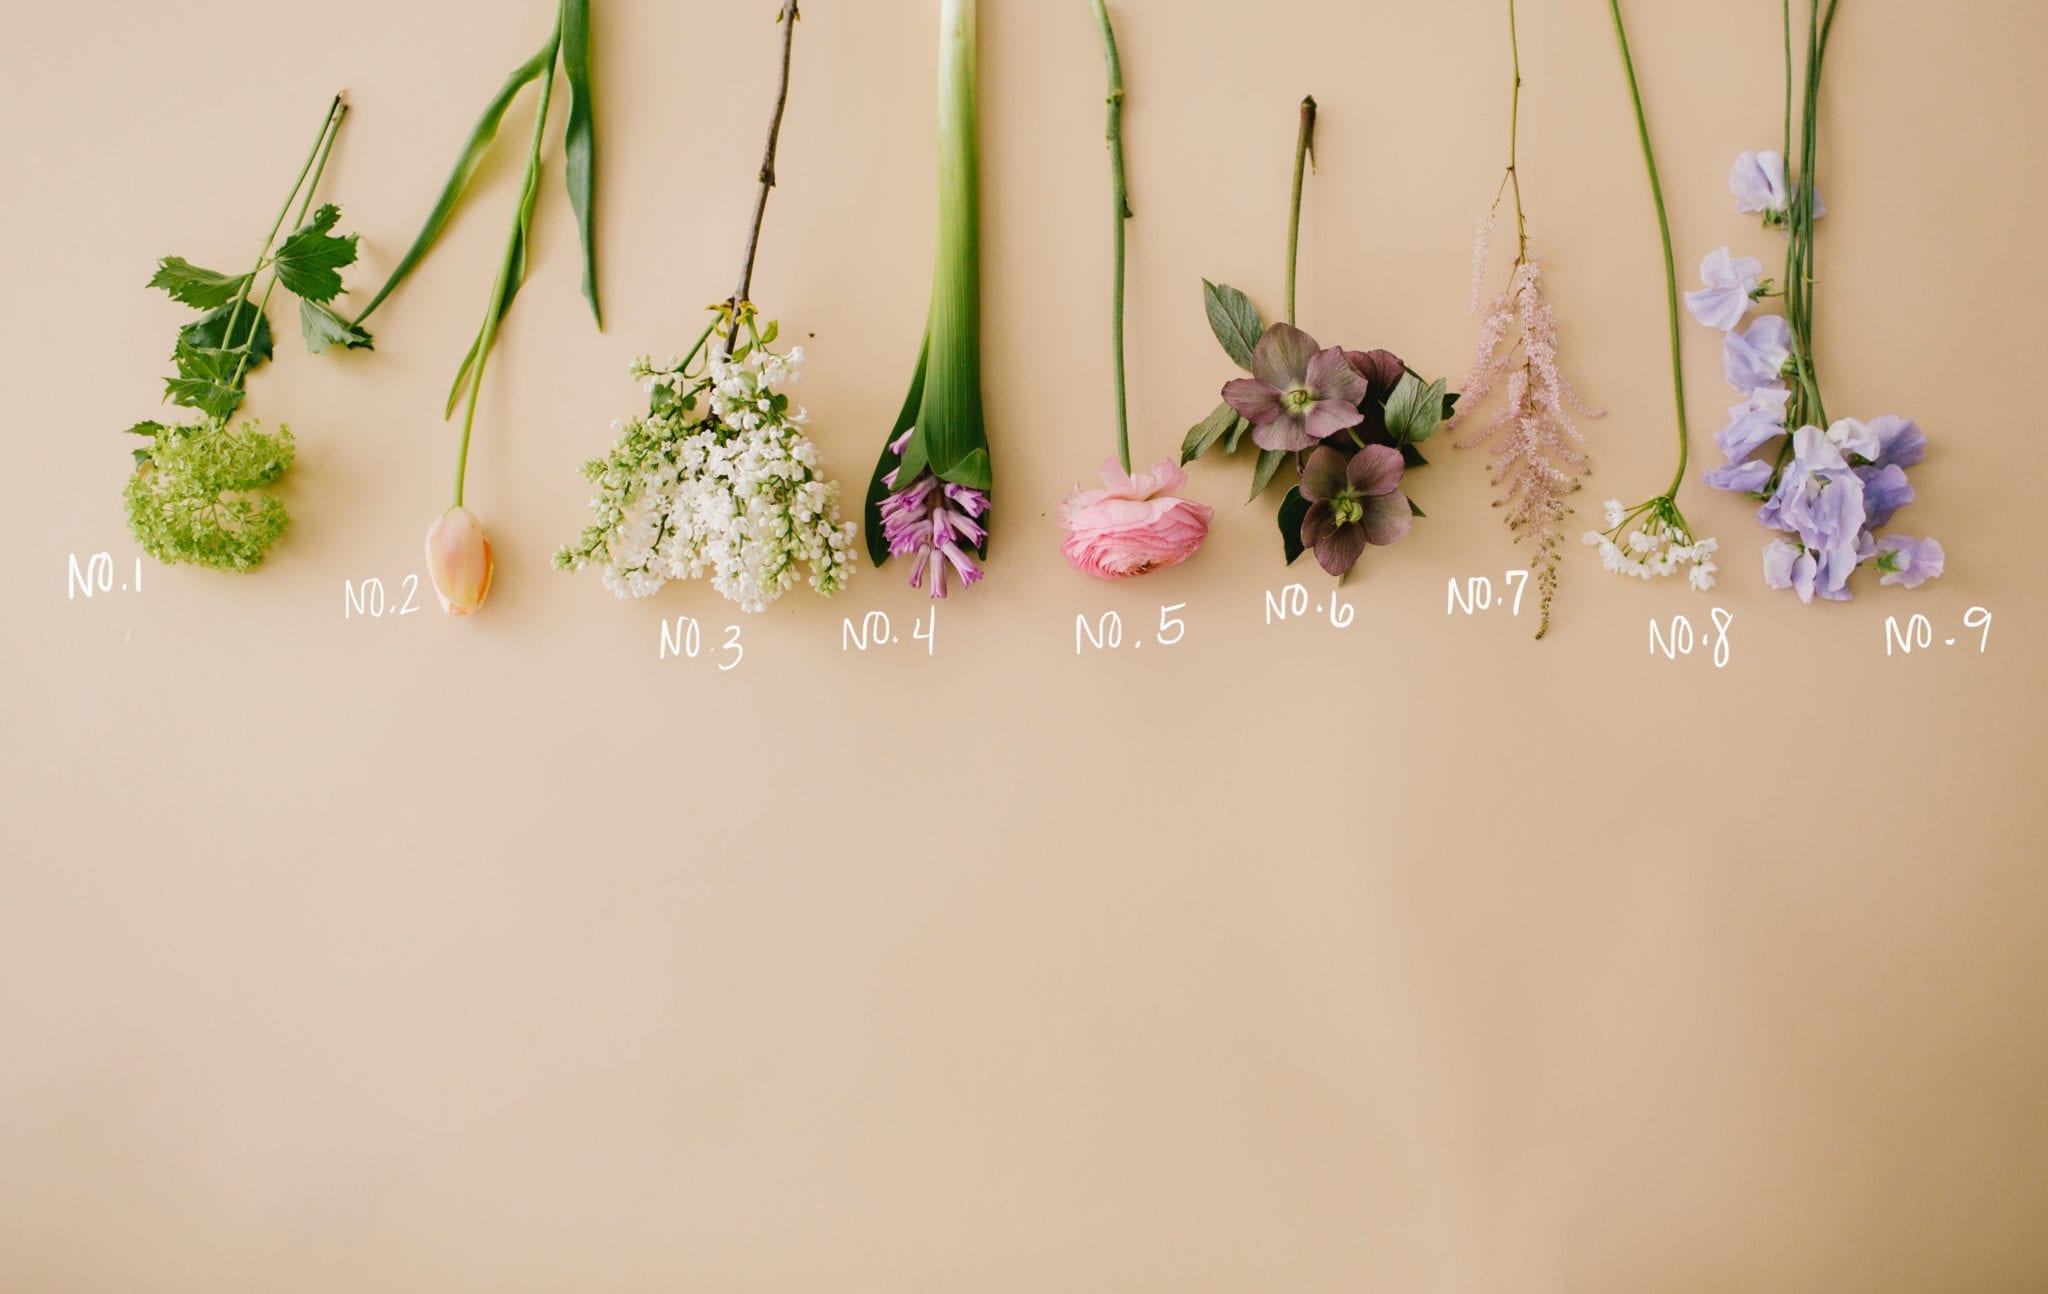 How to Create Your Own Floral Arrangement That Feels Like SPRING | Wit & Delight